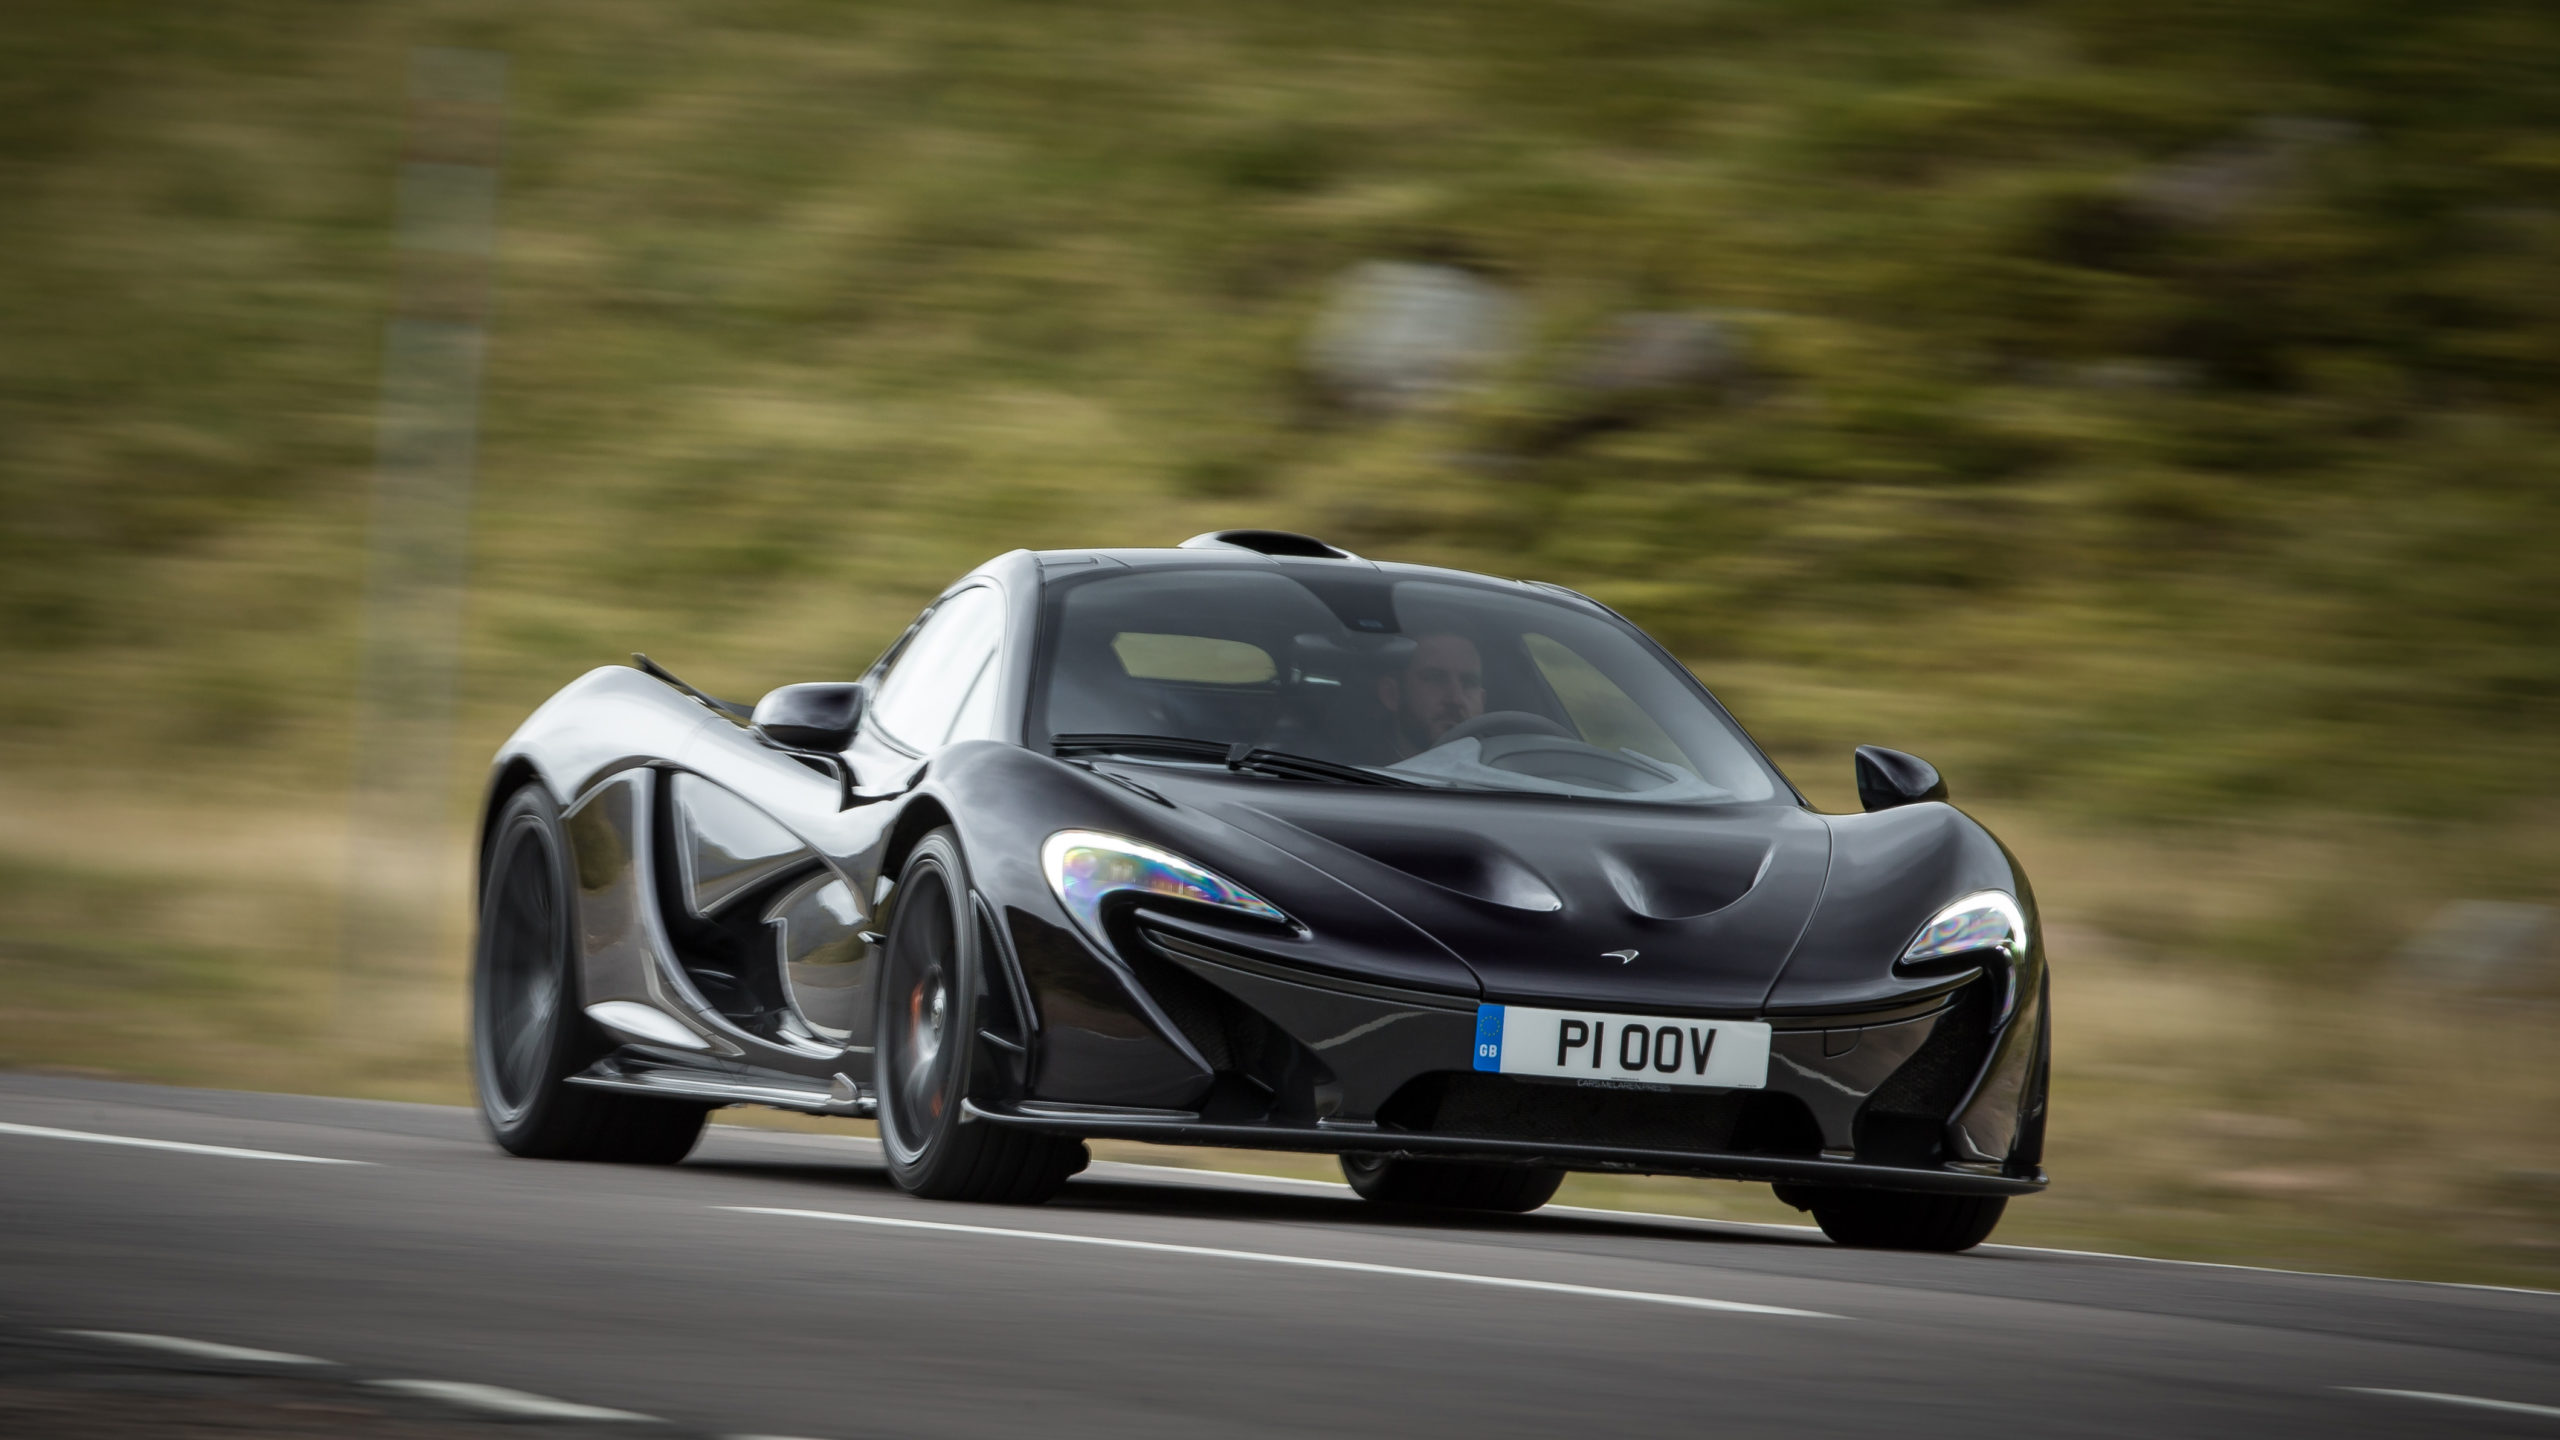 mclaren p1 turns 10: here are 10 things you need to know